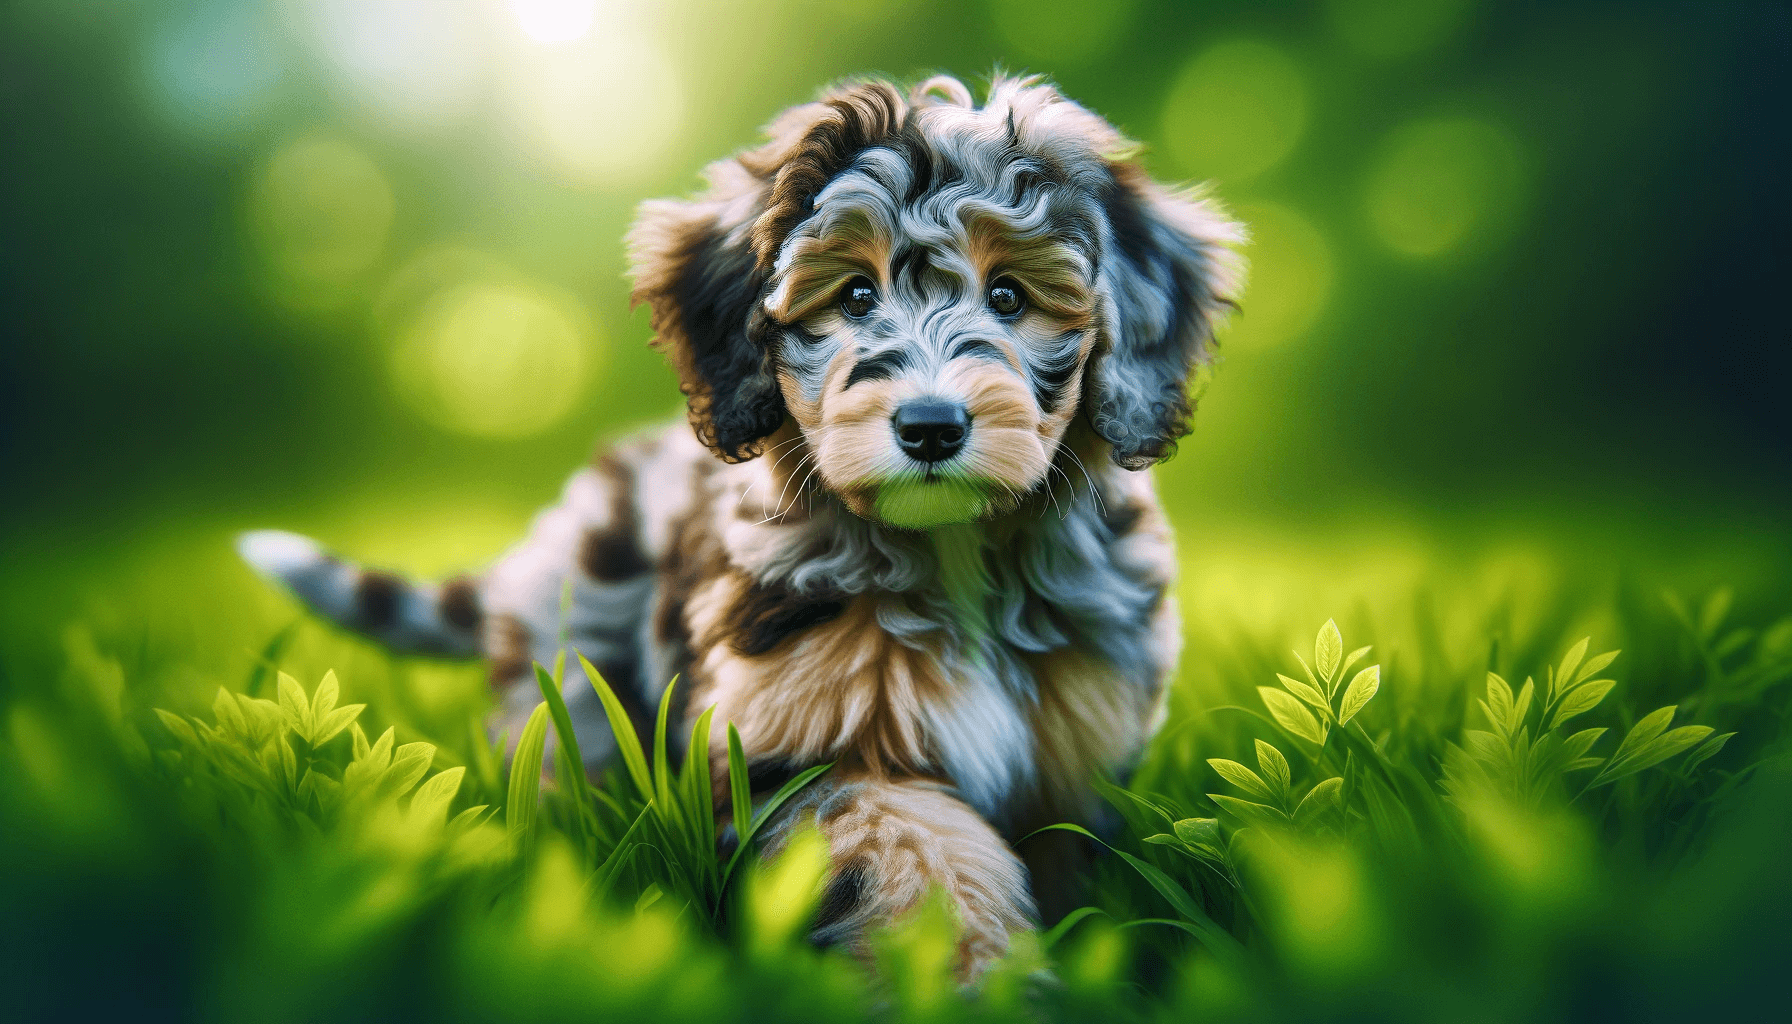 Merle Aussiedoodle puppy amidst the grass, its merle coat blending beautifully with the natural surroundings.